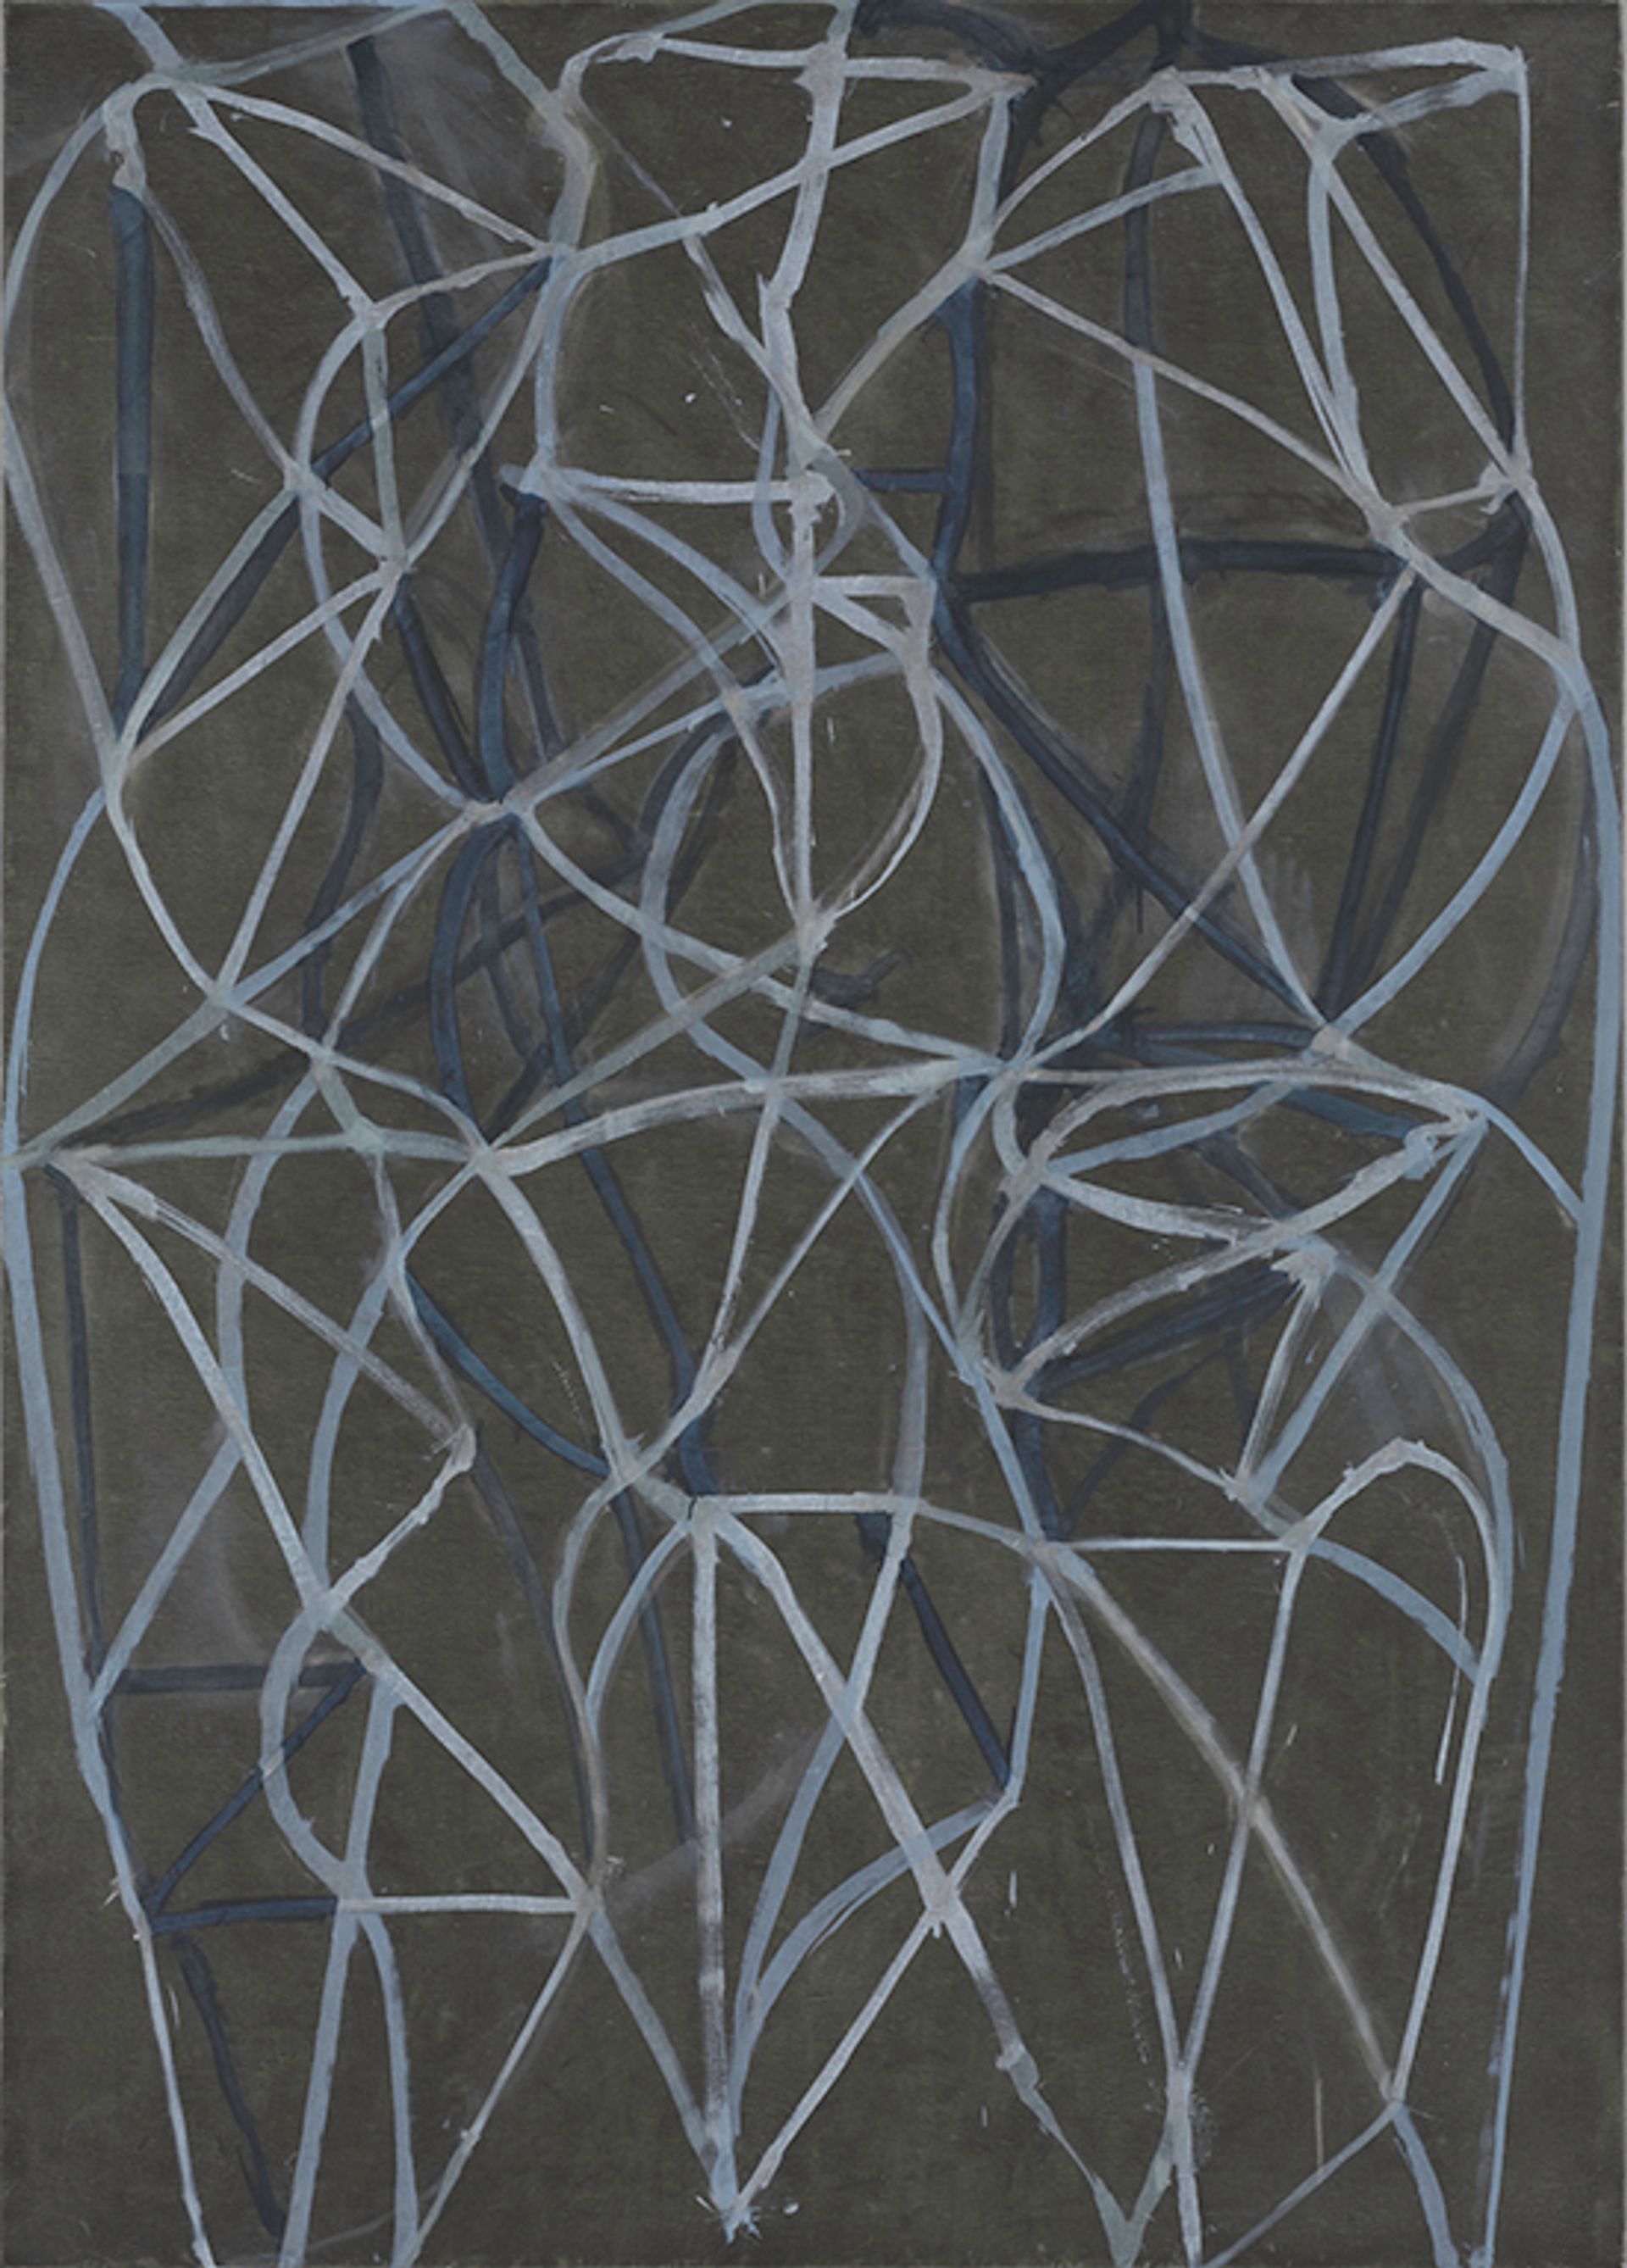 Brice Marden, 3 (1987-88), oil on linen Courtesy of the Baltimore Museum of Art